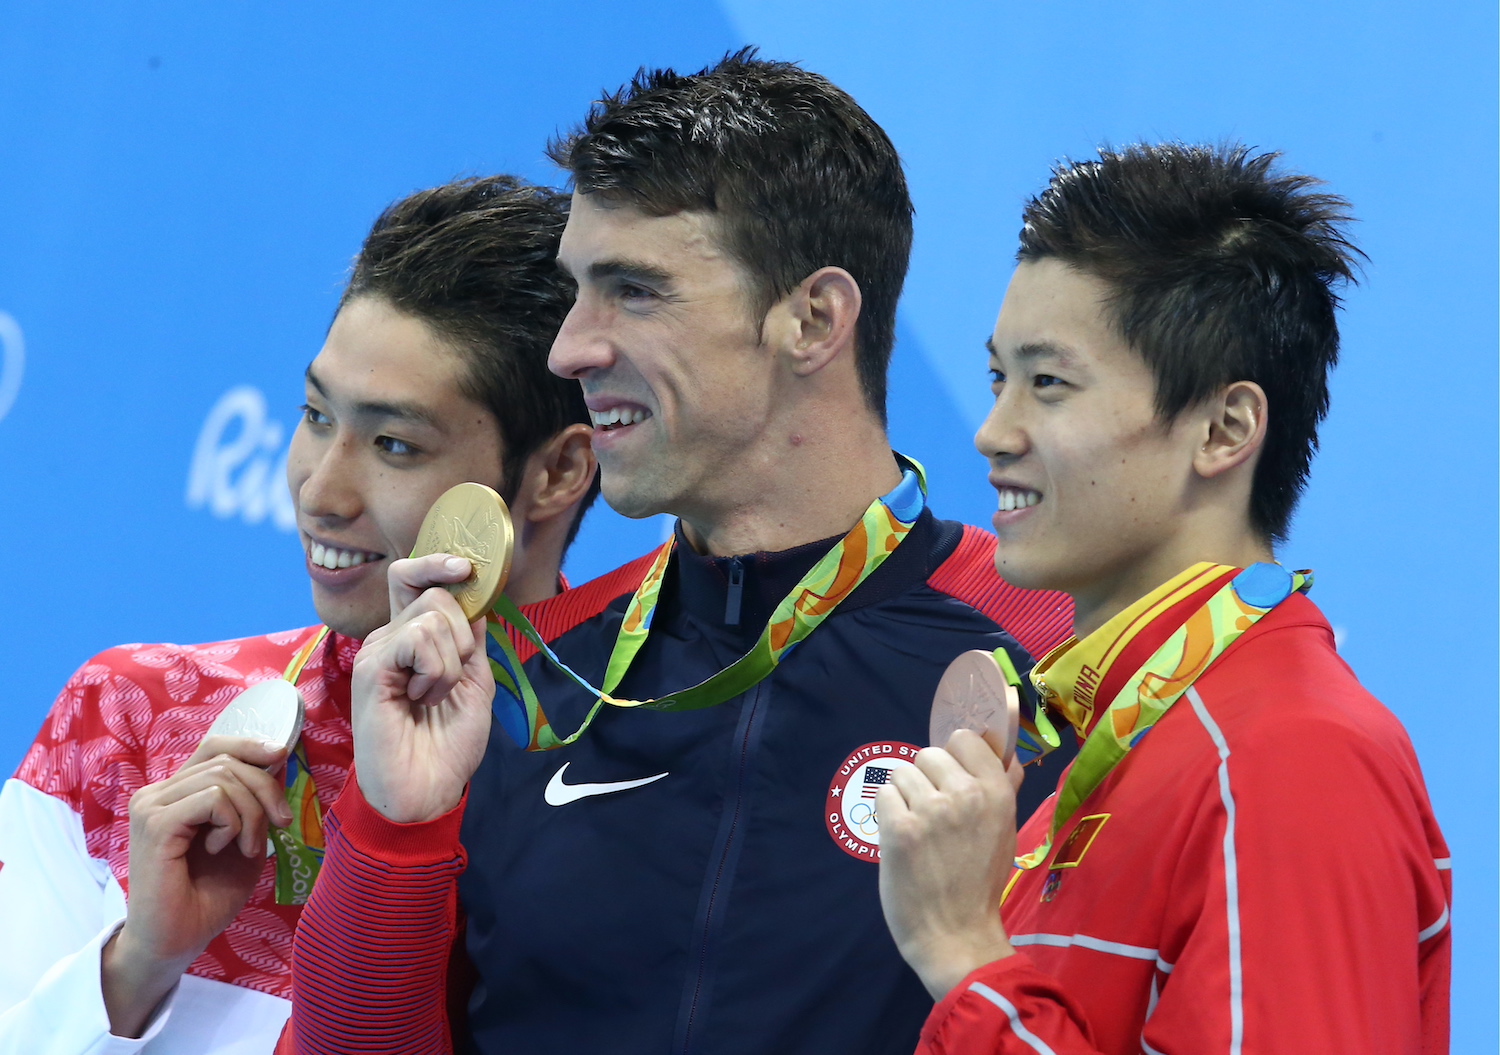 Michael Phelps (center) wins another gold medal to add to his all-time record-setting tally.